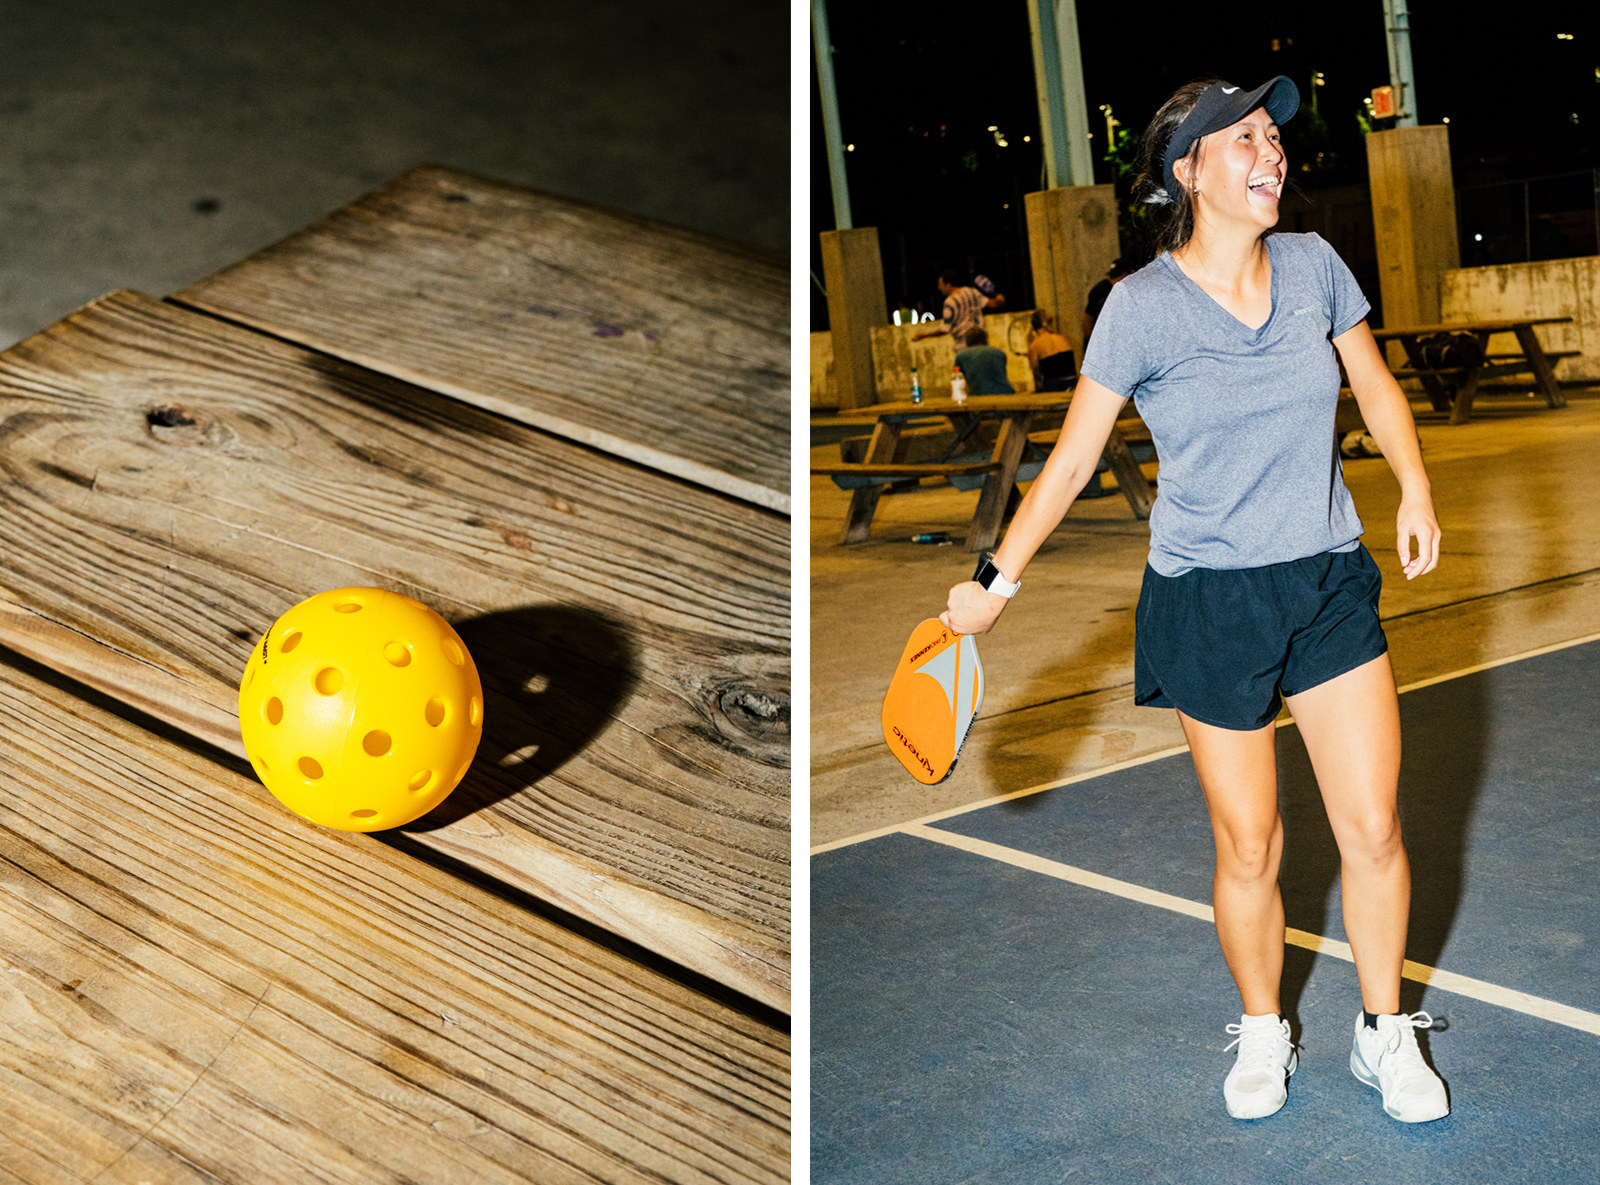 The average pickleball game lasts approximately 15 to 25 minutes and is pla...